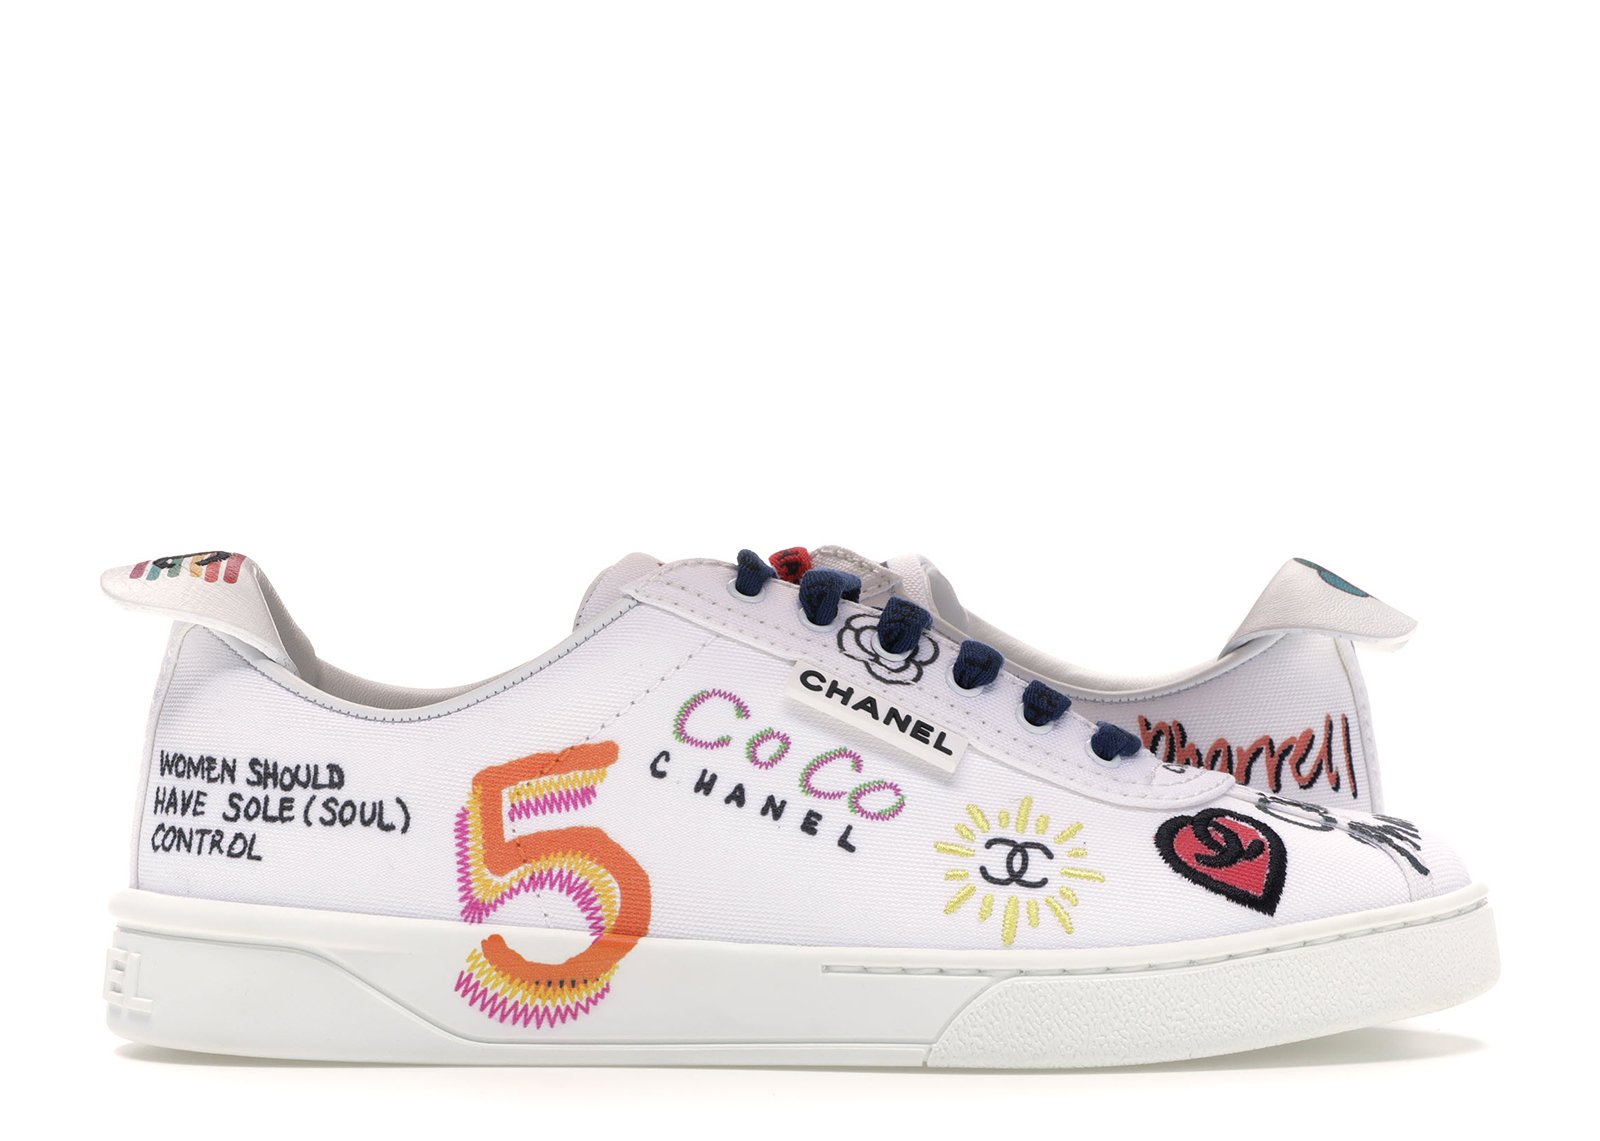 Chanel Sneakers Pharrell White Multi-Color (W) sneakers